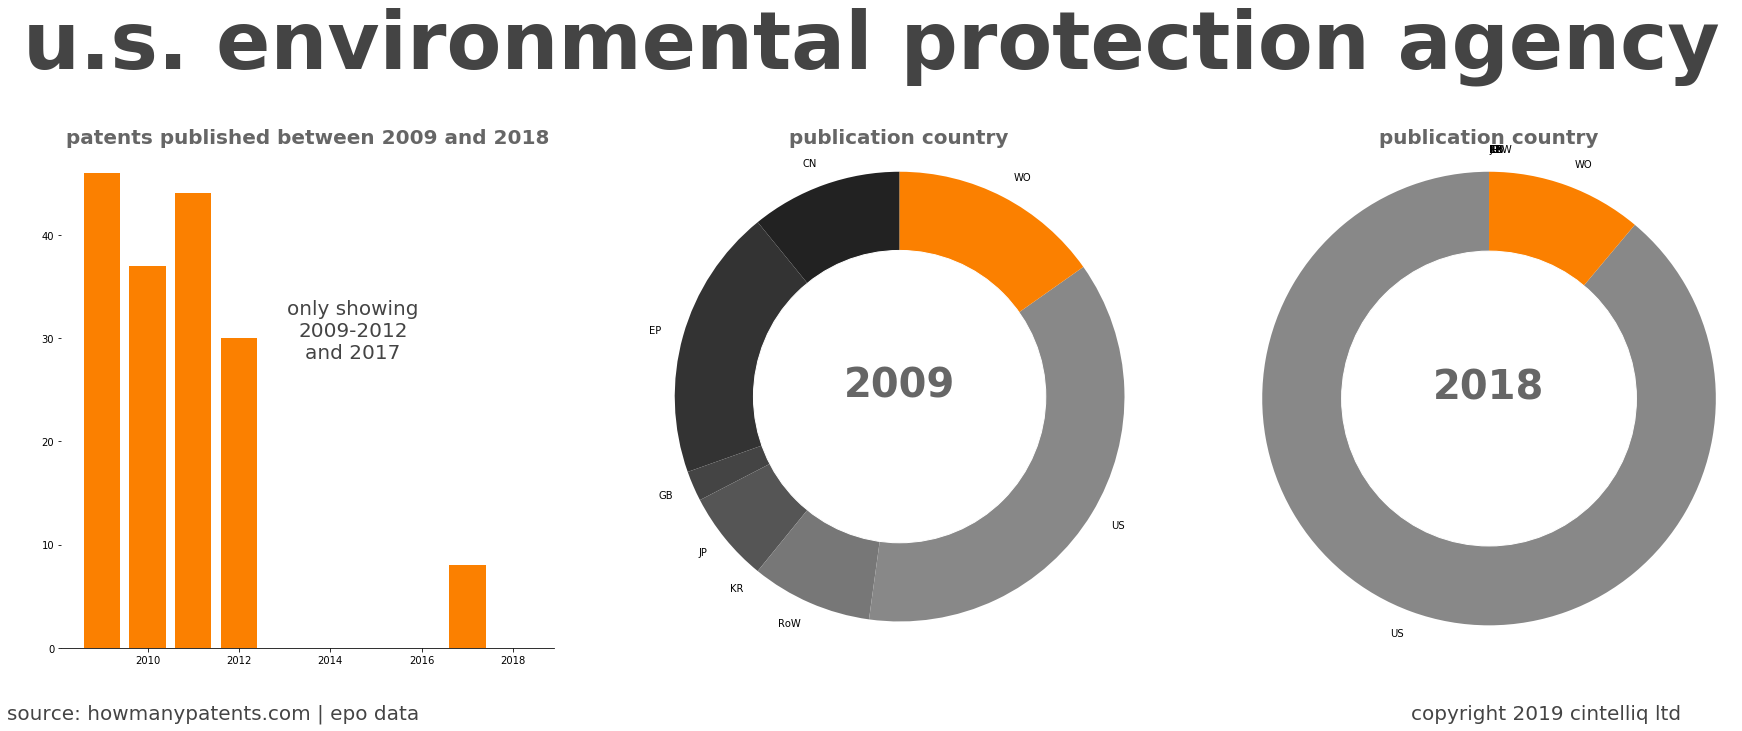 summary of patents for U.S. Environmental Protection Agency